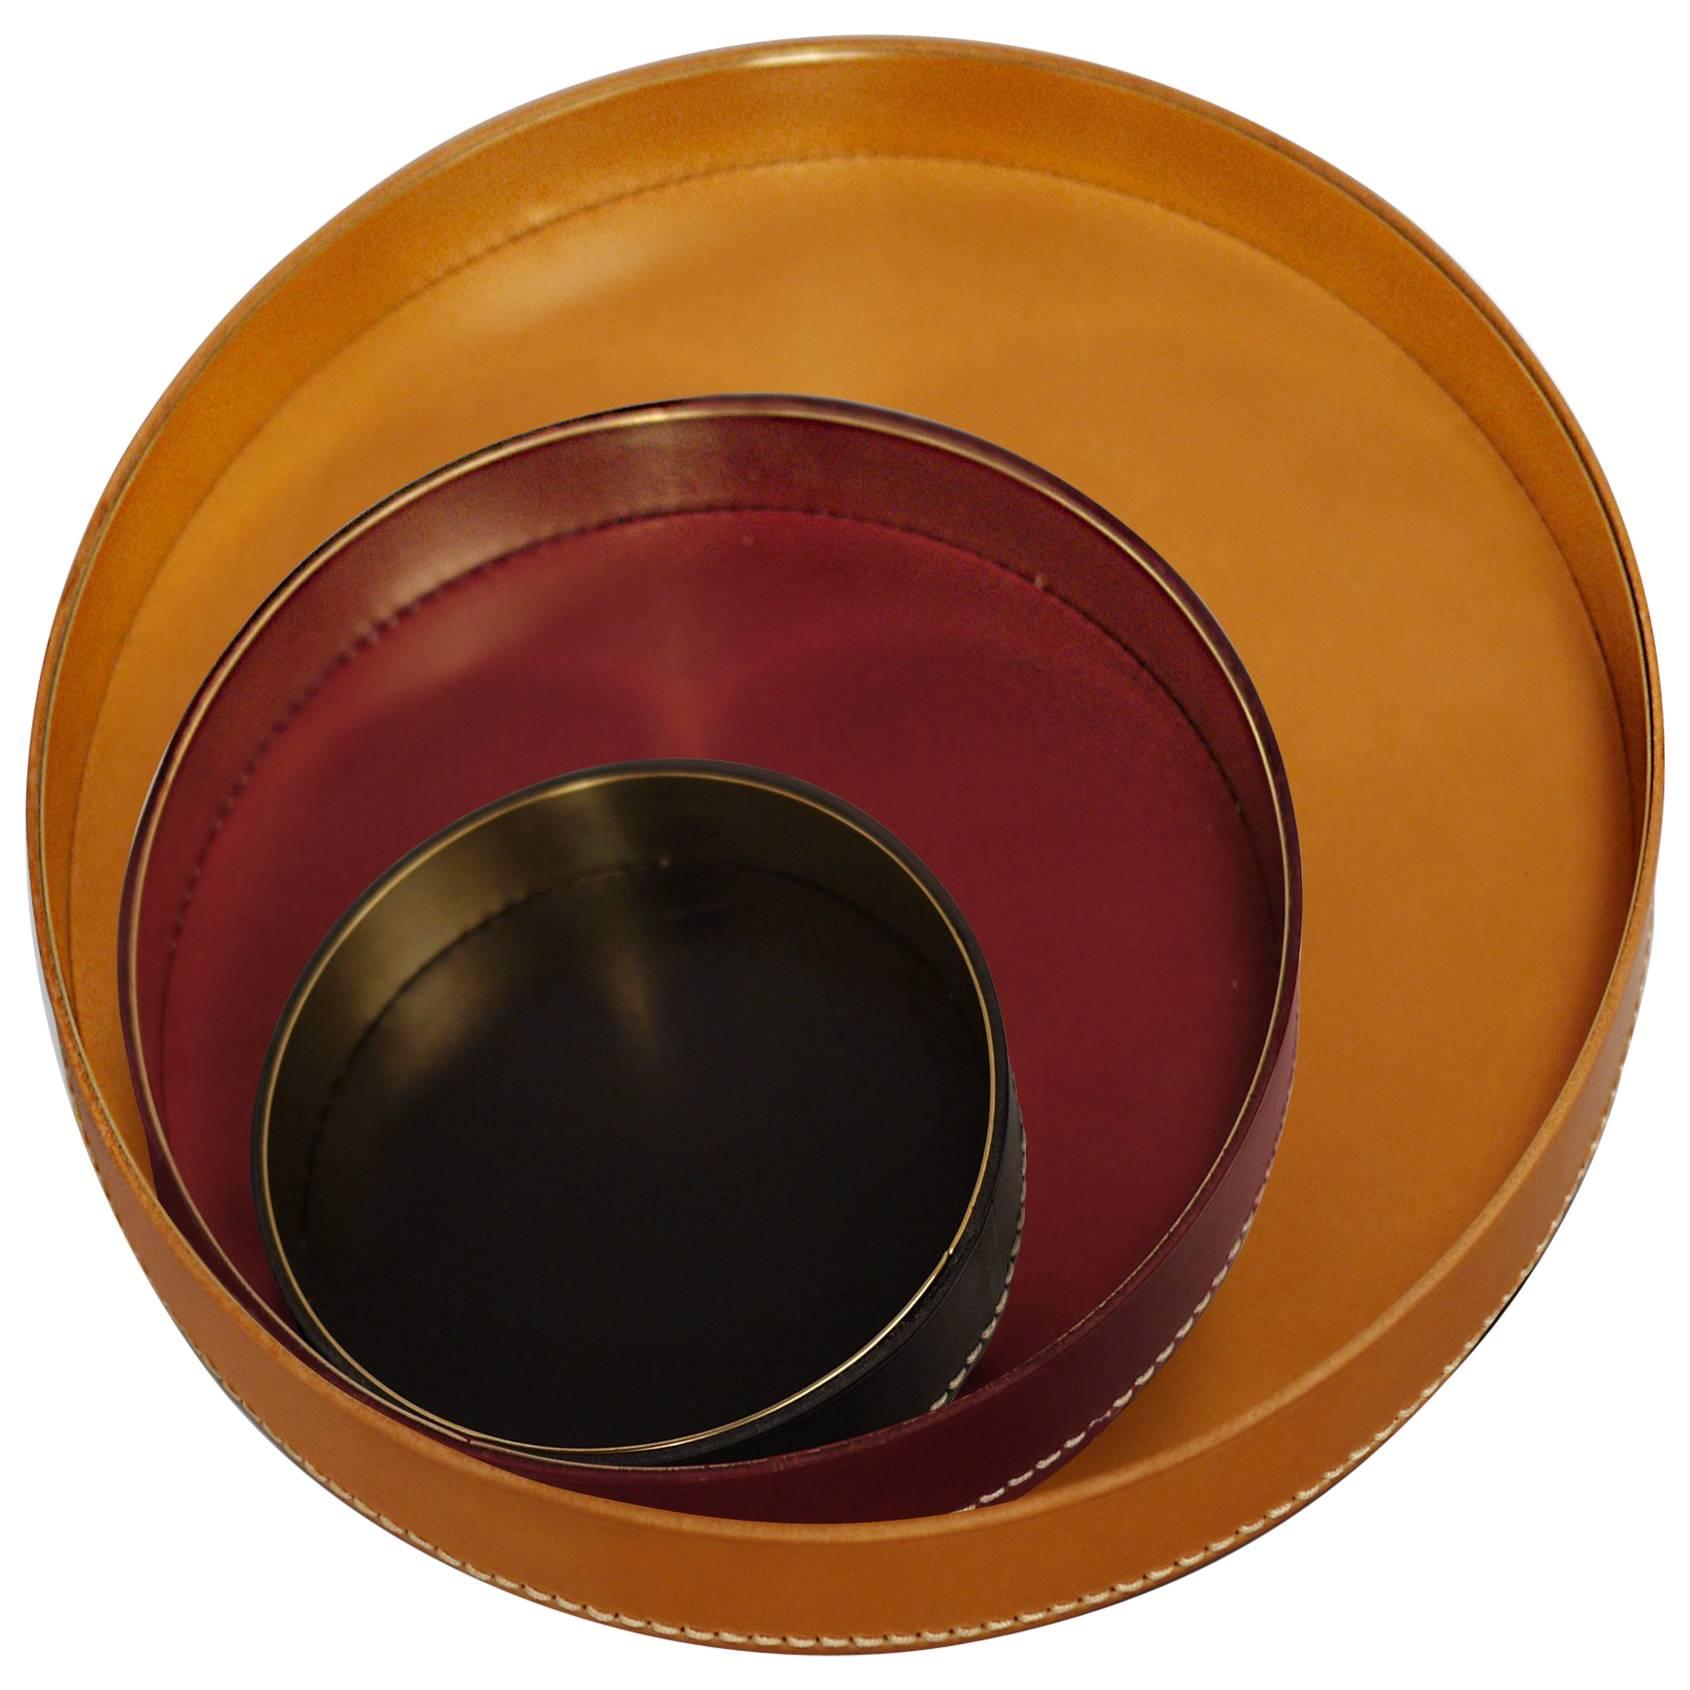 Part of Les Few's Armance collection, this set of contemporary, round, leather and brass, modern, Minimalist, trays or centerpieces are made by artisans in Sweden. It is a set of three trays. The leather trays comes in cognac, burgundy and black.